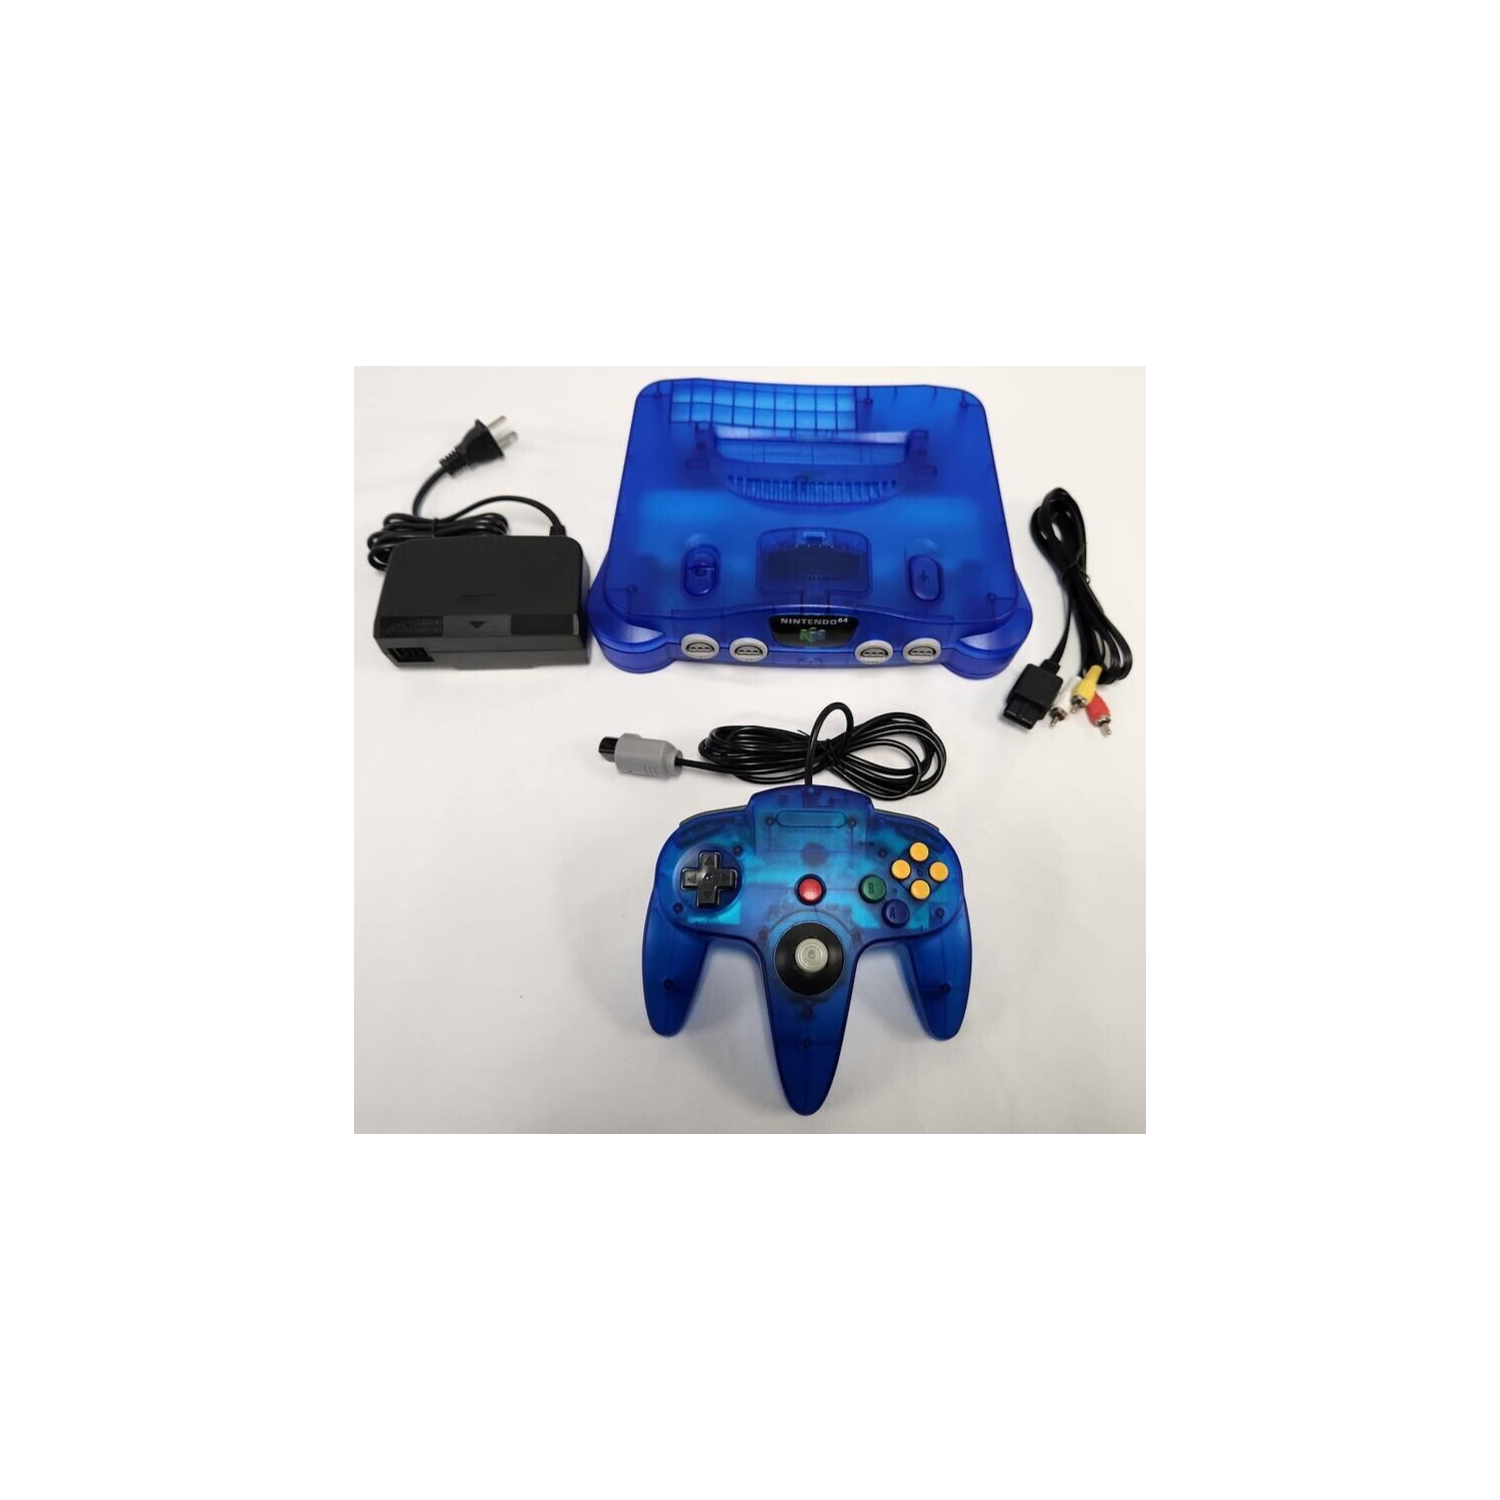 NINTENDO 64 CONSOLE Refurbished Excellent Pre-Owned Authentic Nintendo 64 N64 Clear Translucent Dark Blue Region Free USA&JP